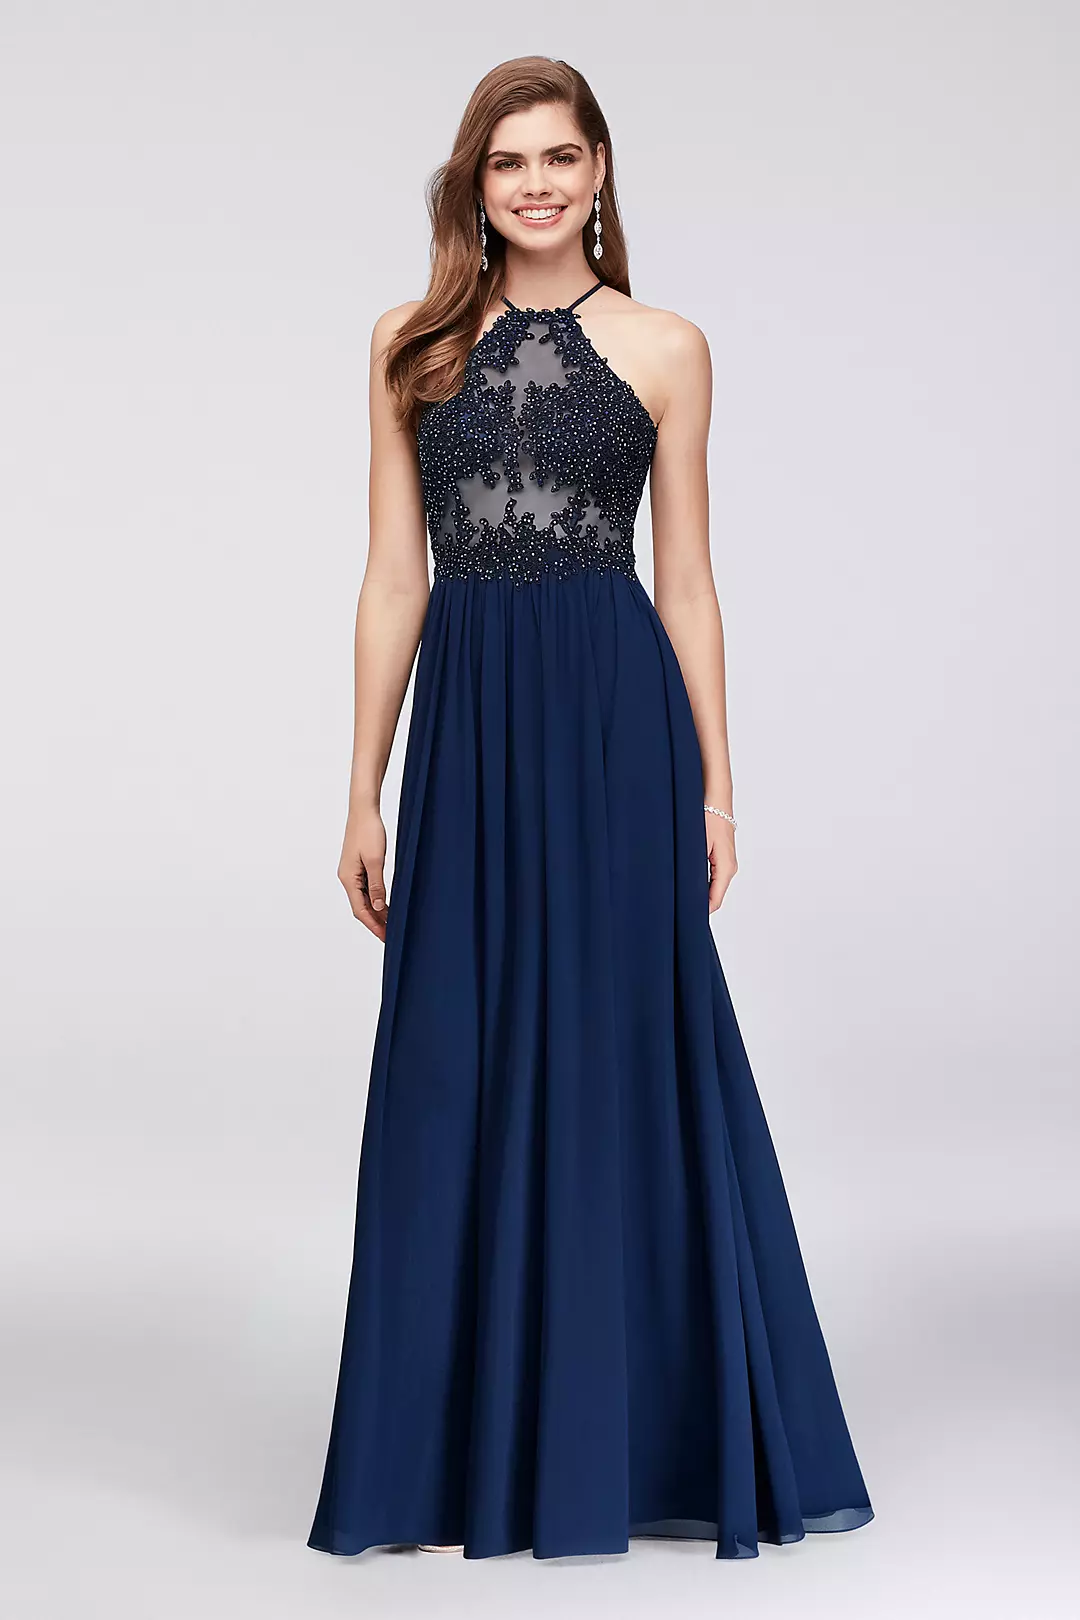 Appliqued Illusion Halter Gown with Chiffon Skirt Image